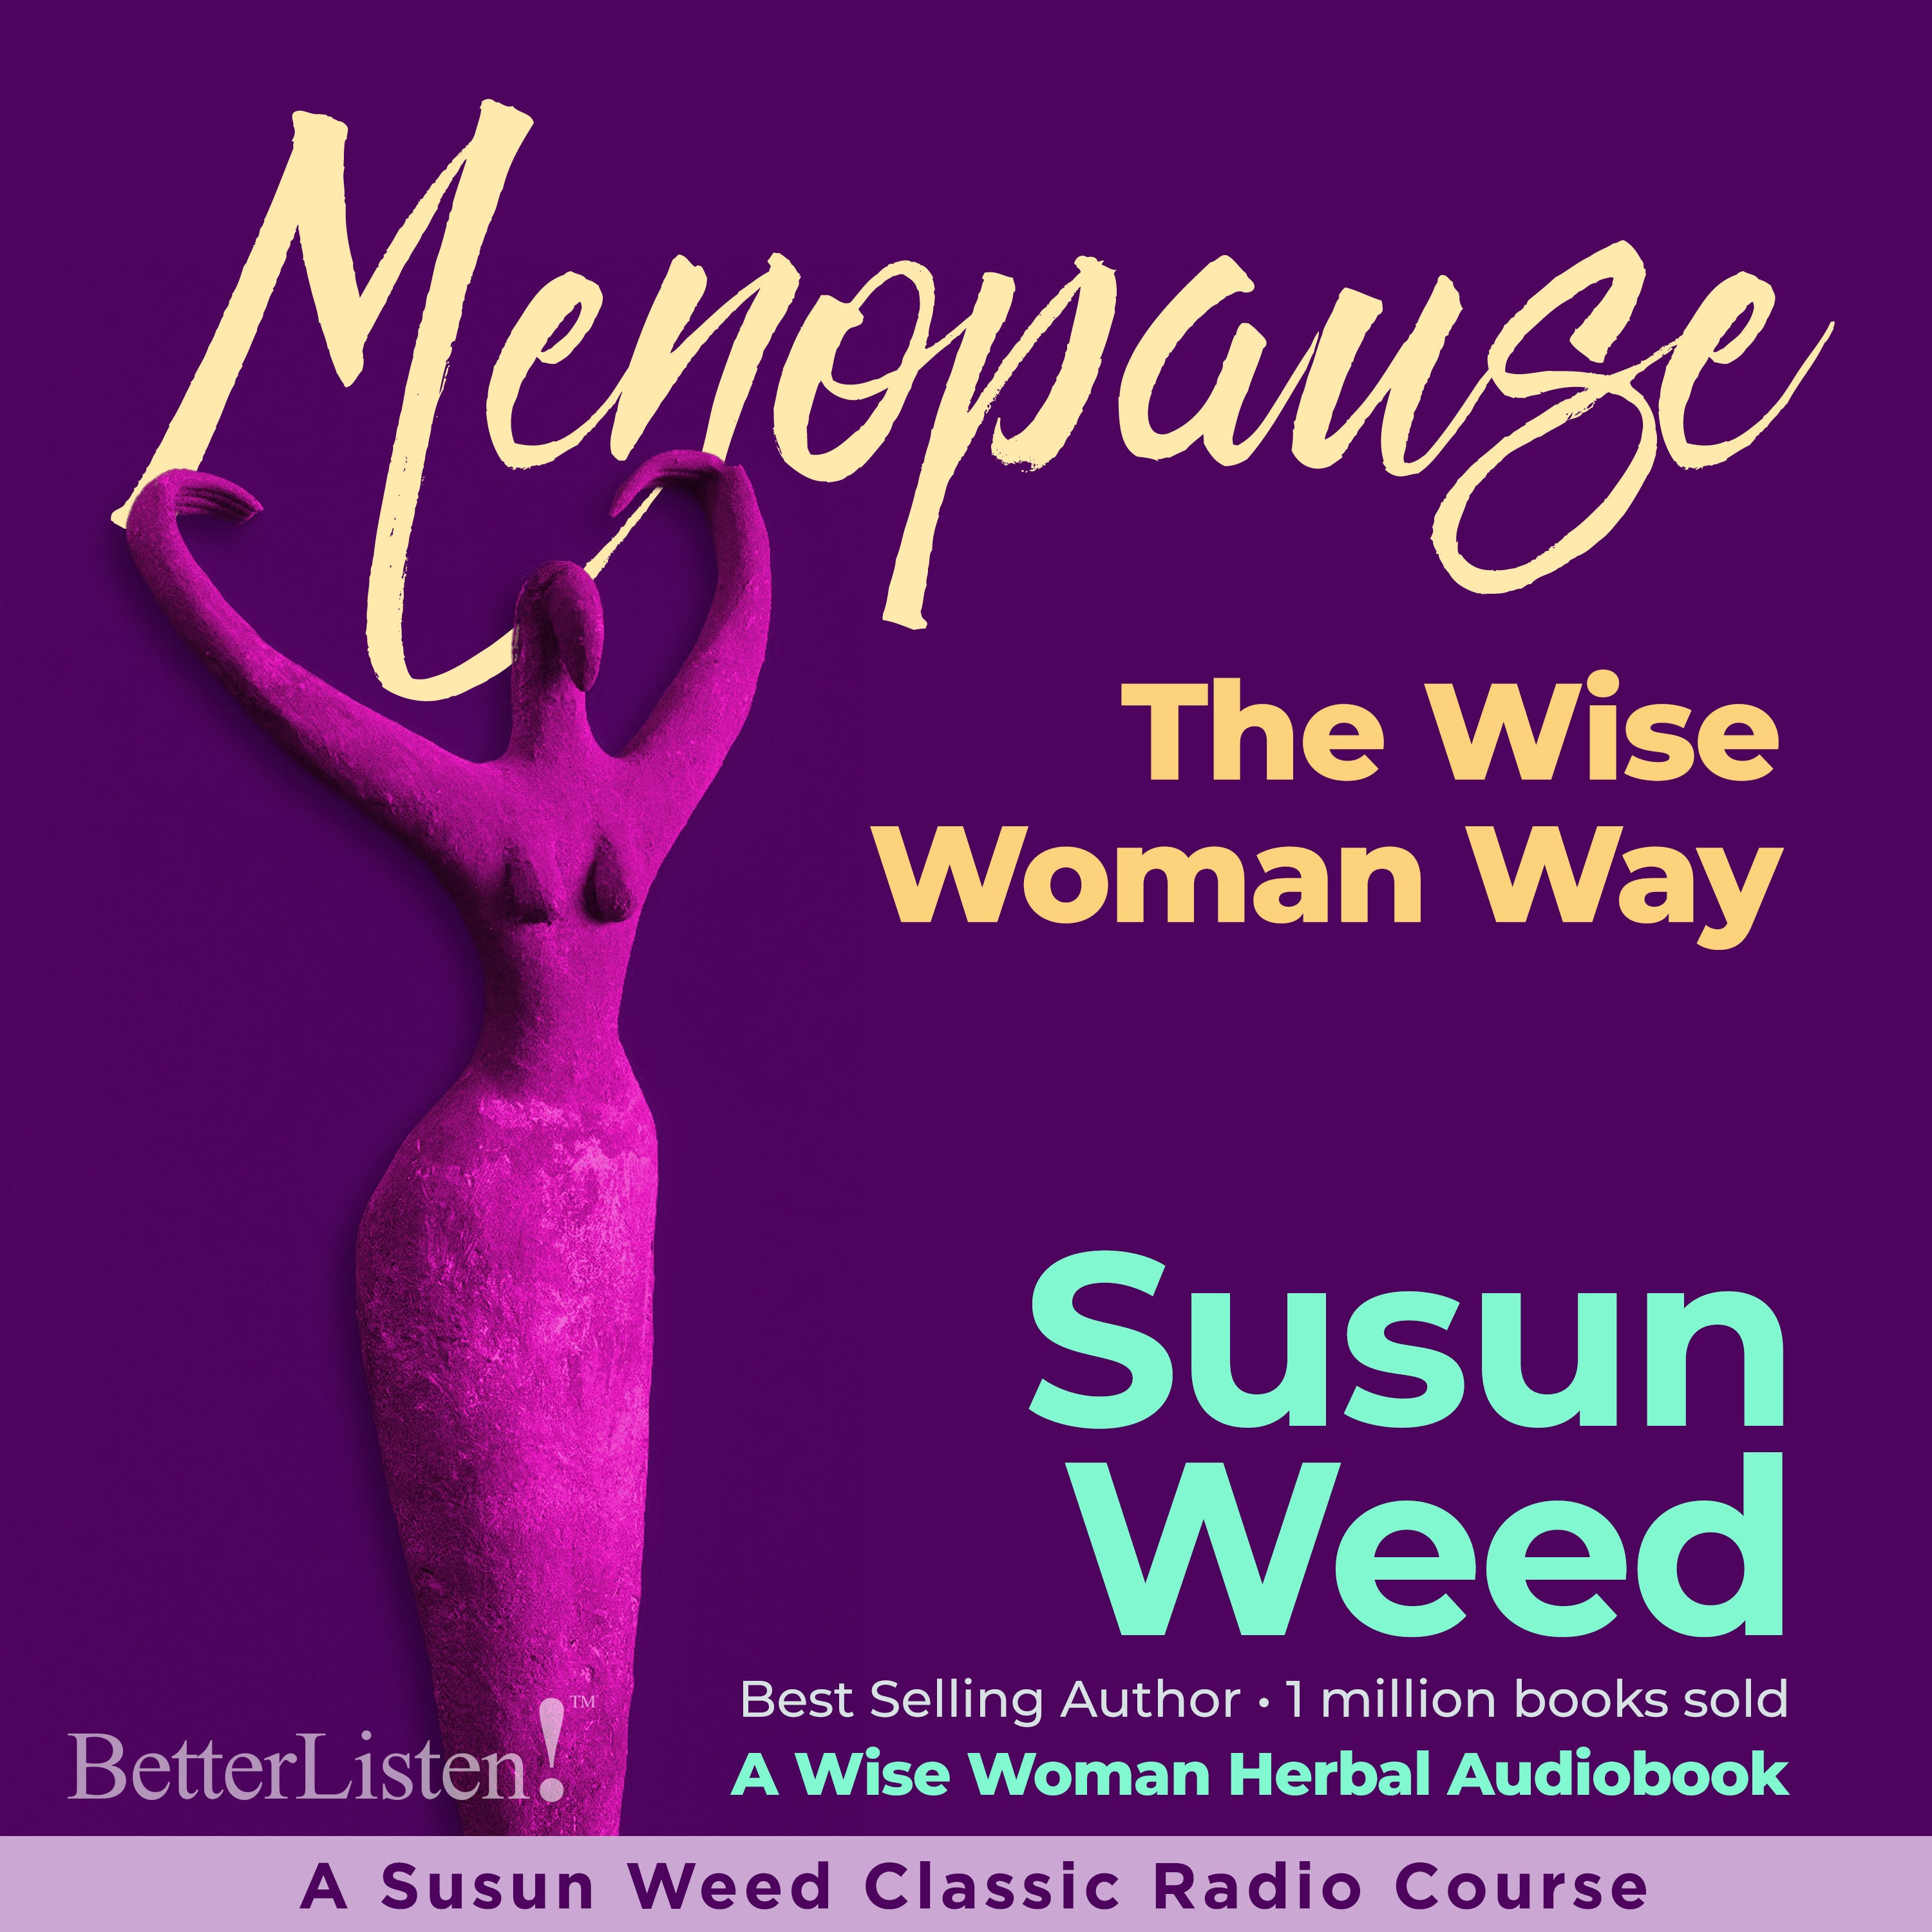 Menopause, the Wise Woman Way with Susun Weed